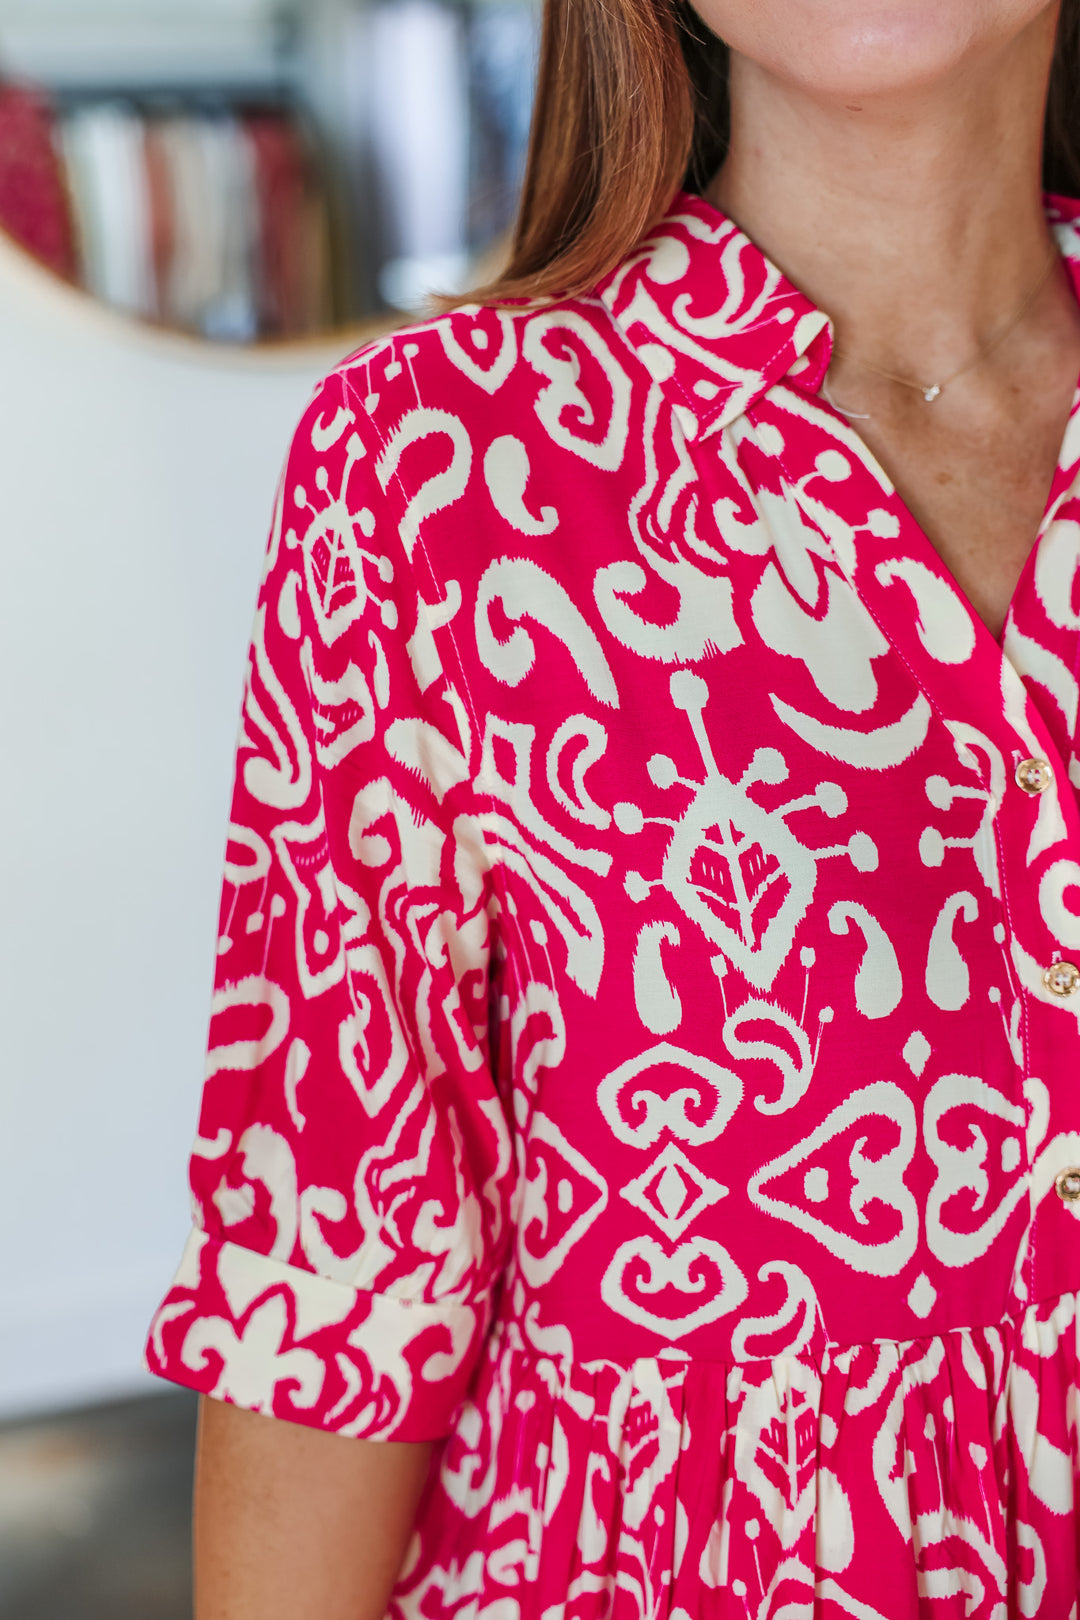 A closeup of the abstract print on a fuchsia and cream colored dress with button collar and 3/4 length sleeves.